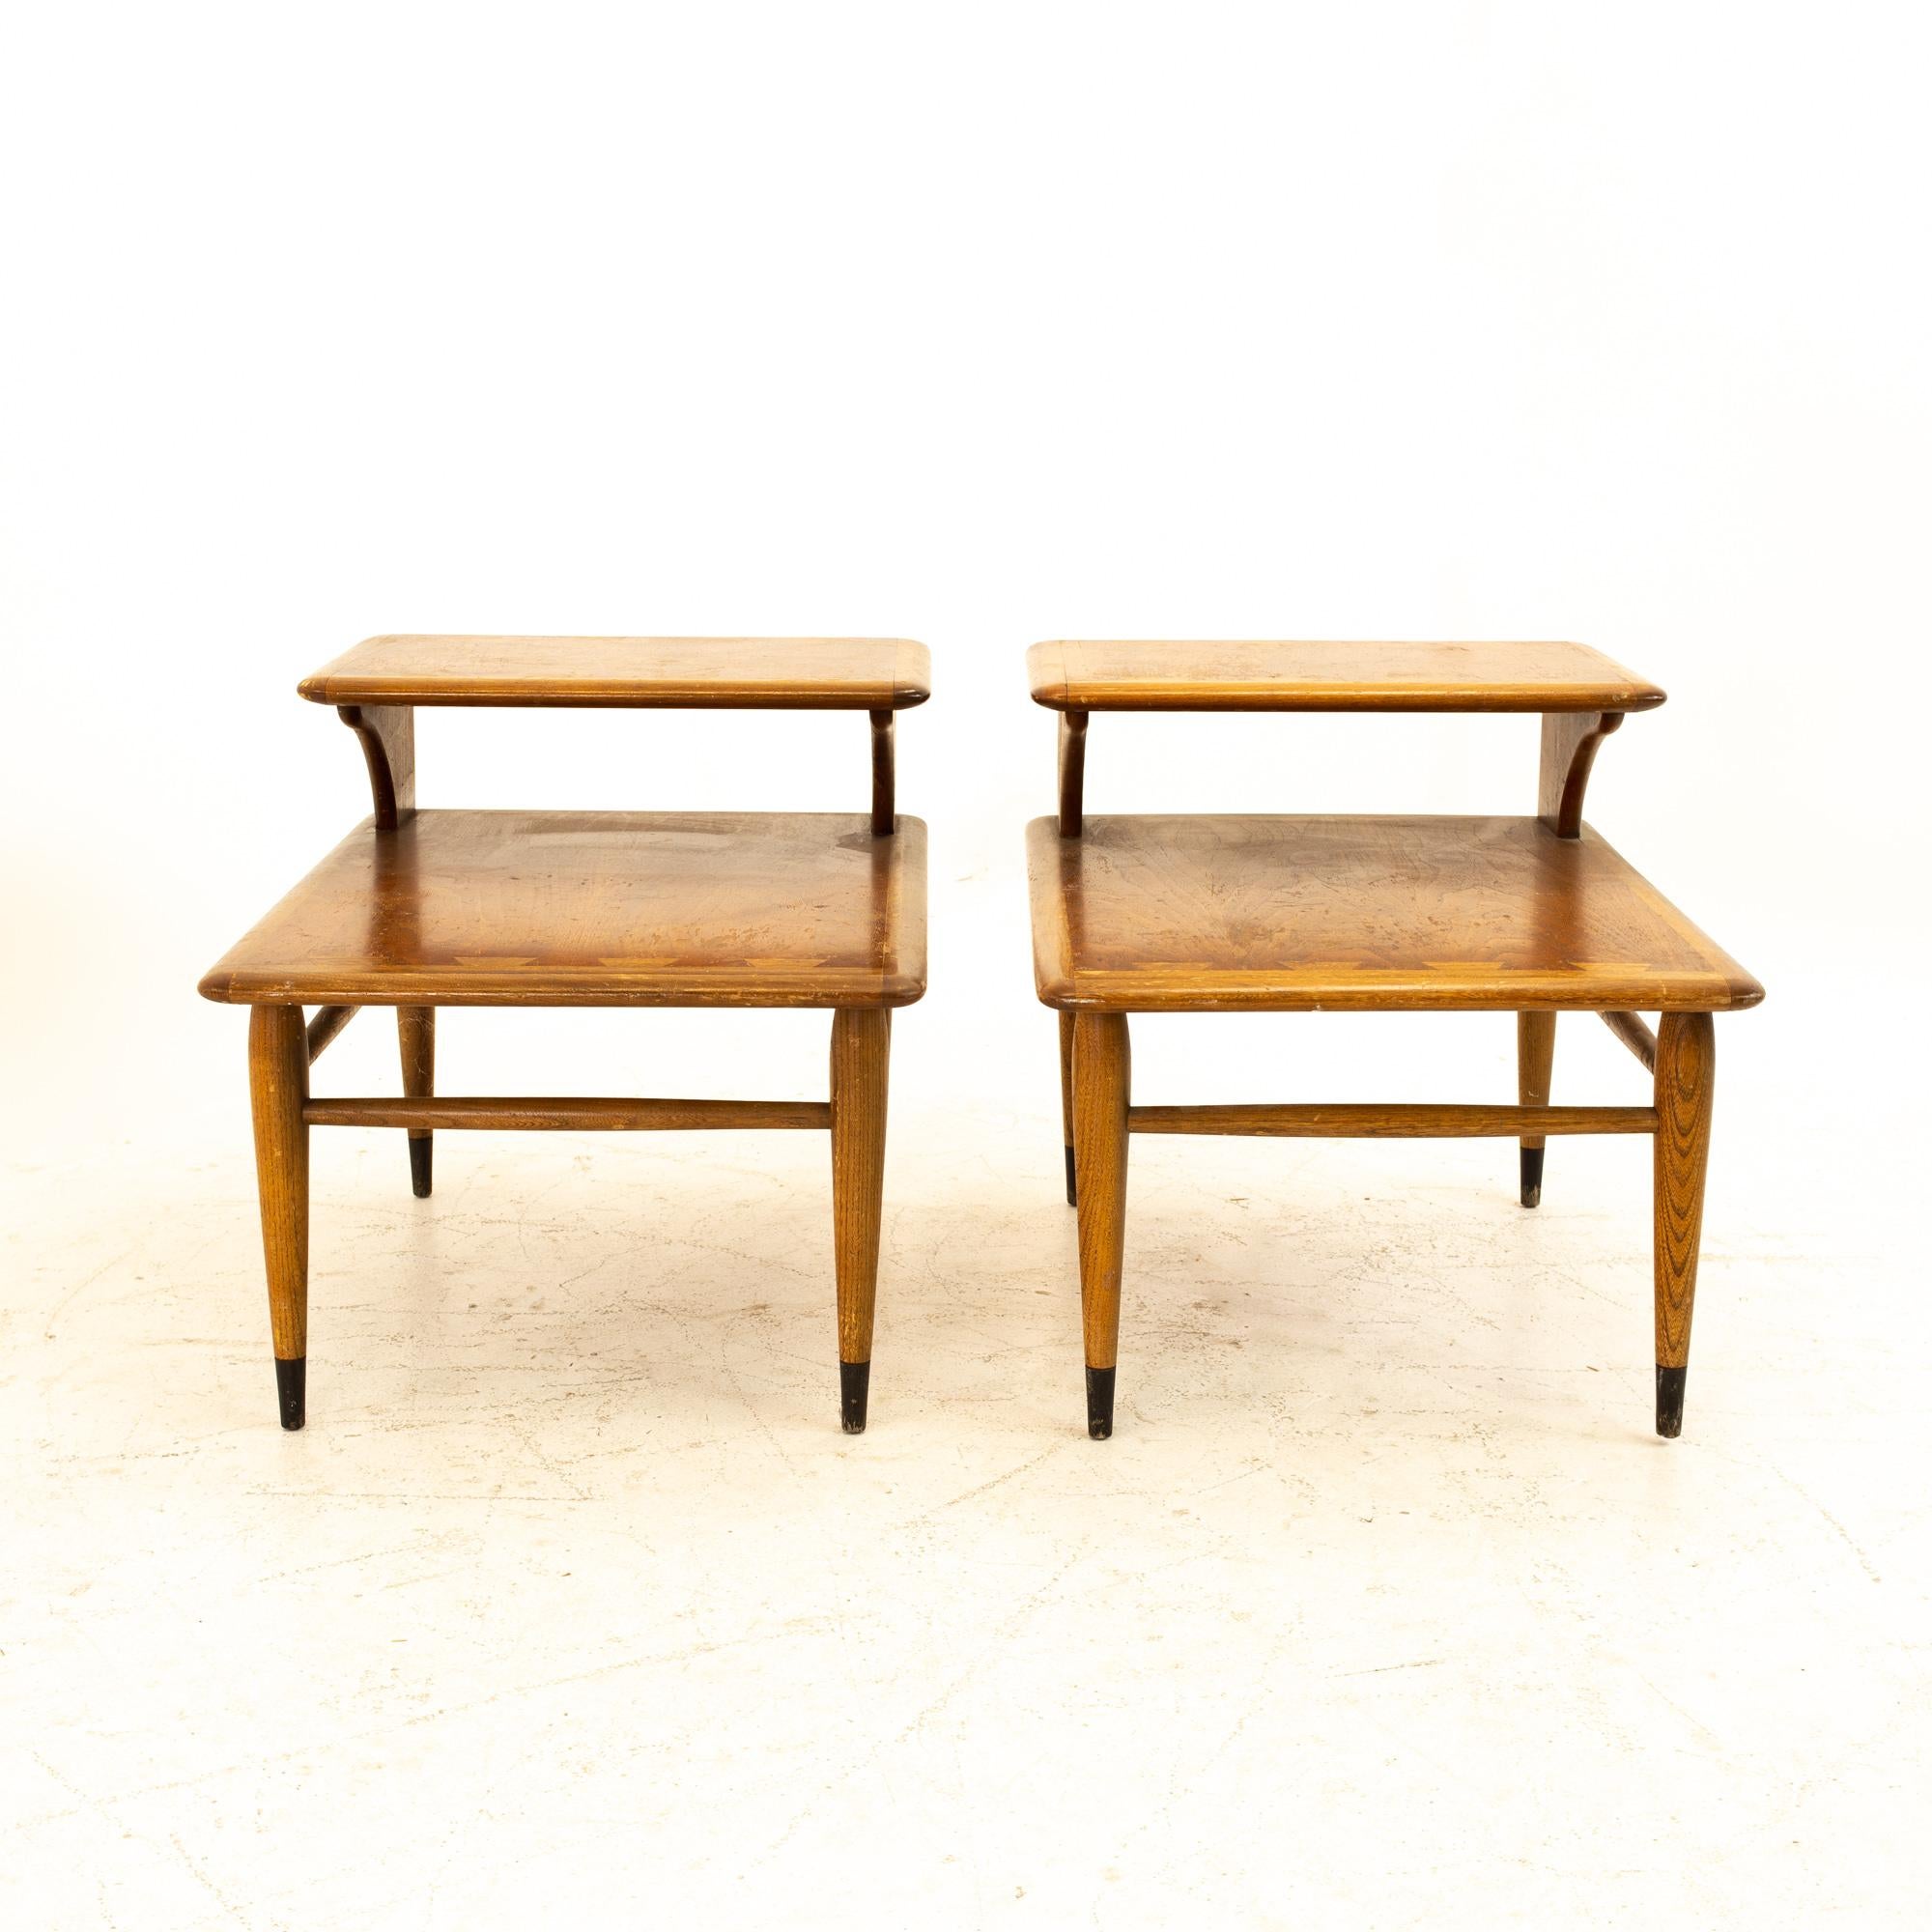 Andre Bus for Lane Acclaim mid century walnut dovetail step side end tables - pair

Side table measures: 21 wide x 27.5 deep x 20.5 high 

All pieces of furniture can be had in what we call restored vintage condition. That means the piece is